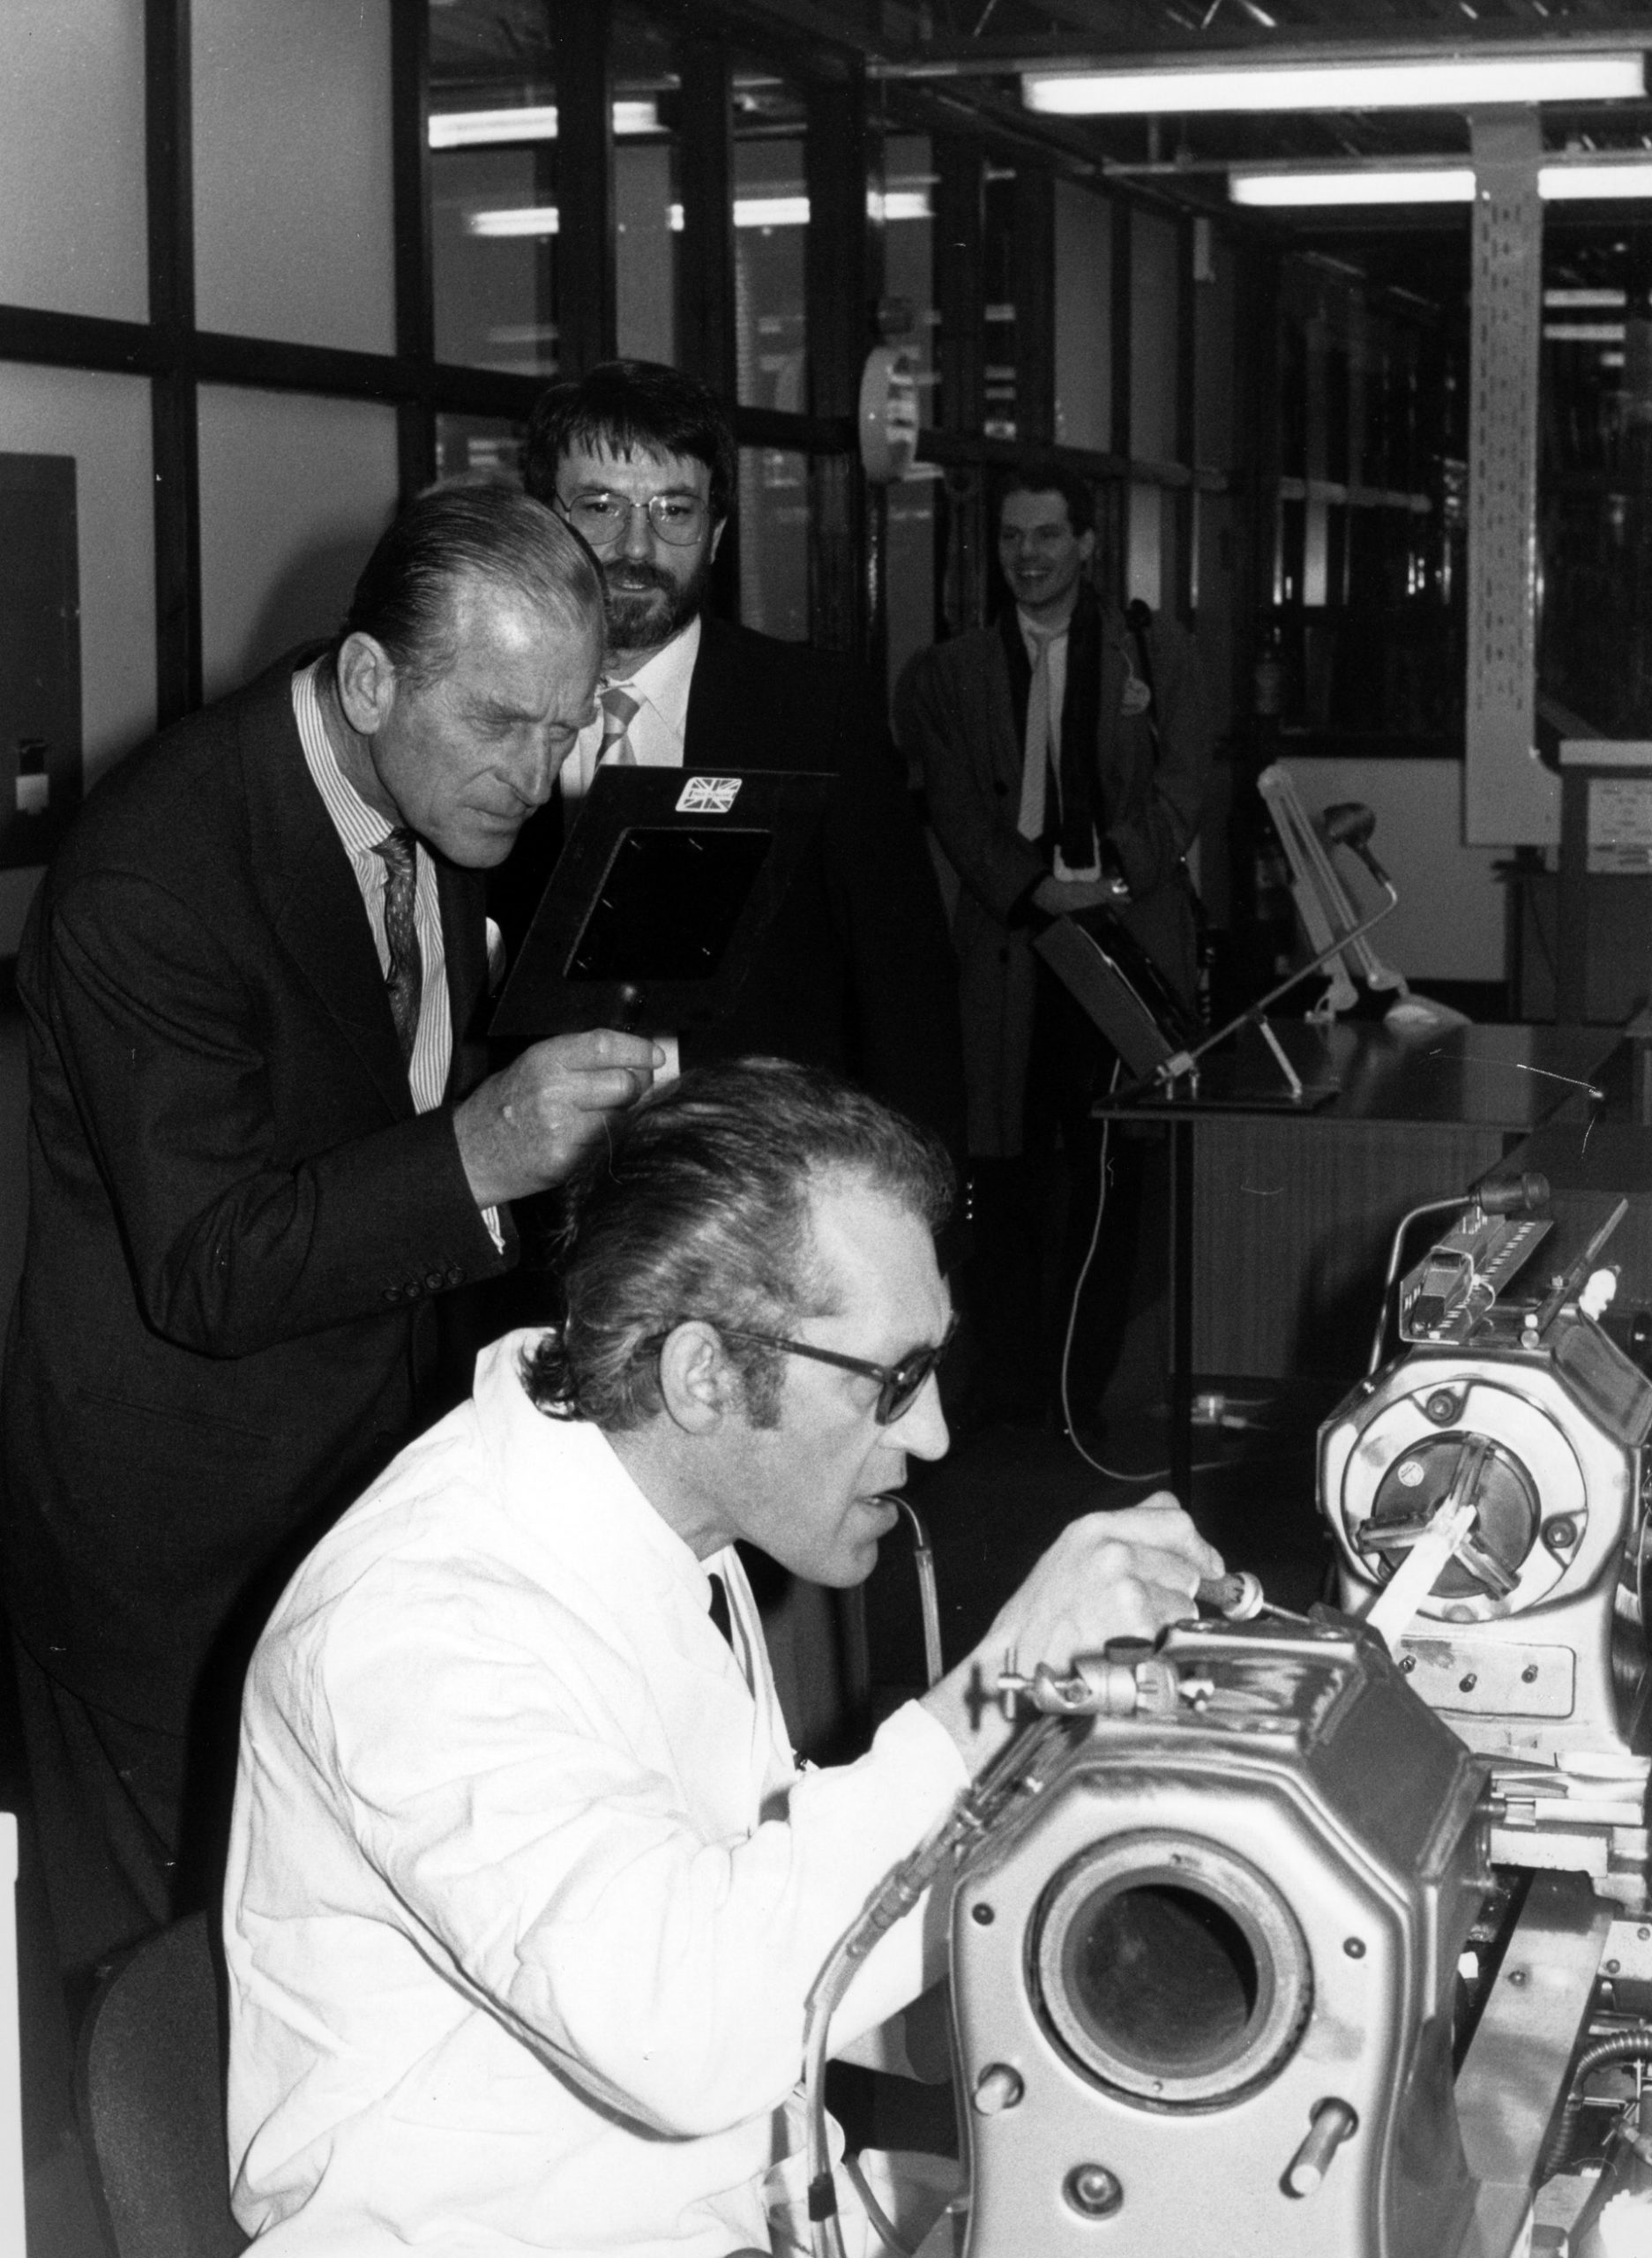 In 1985, witnessing the production of flash tubes during a visit to Cambridge Science Park in his role as Chancellor of Cambridge University.